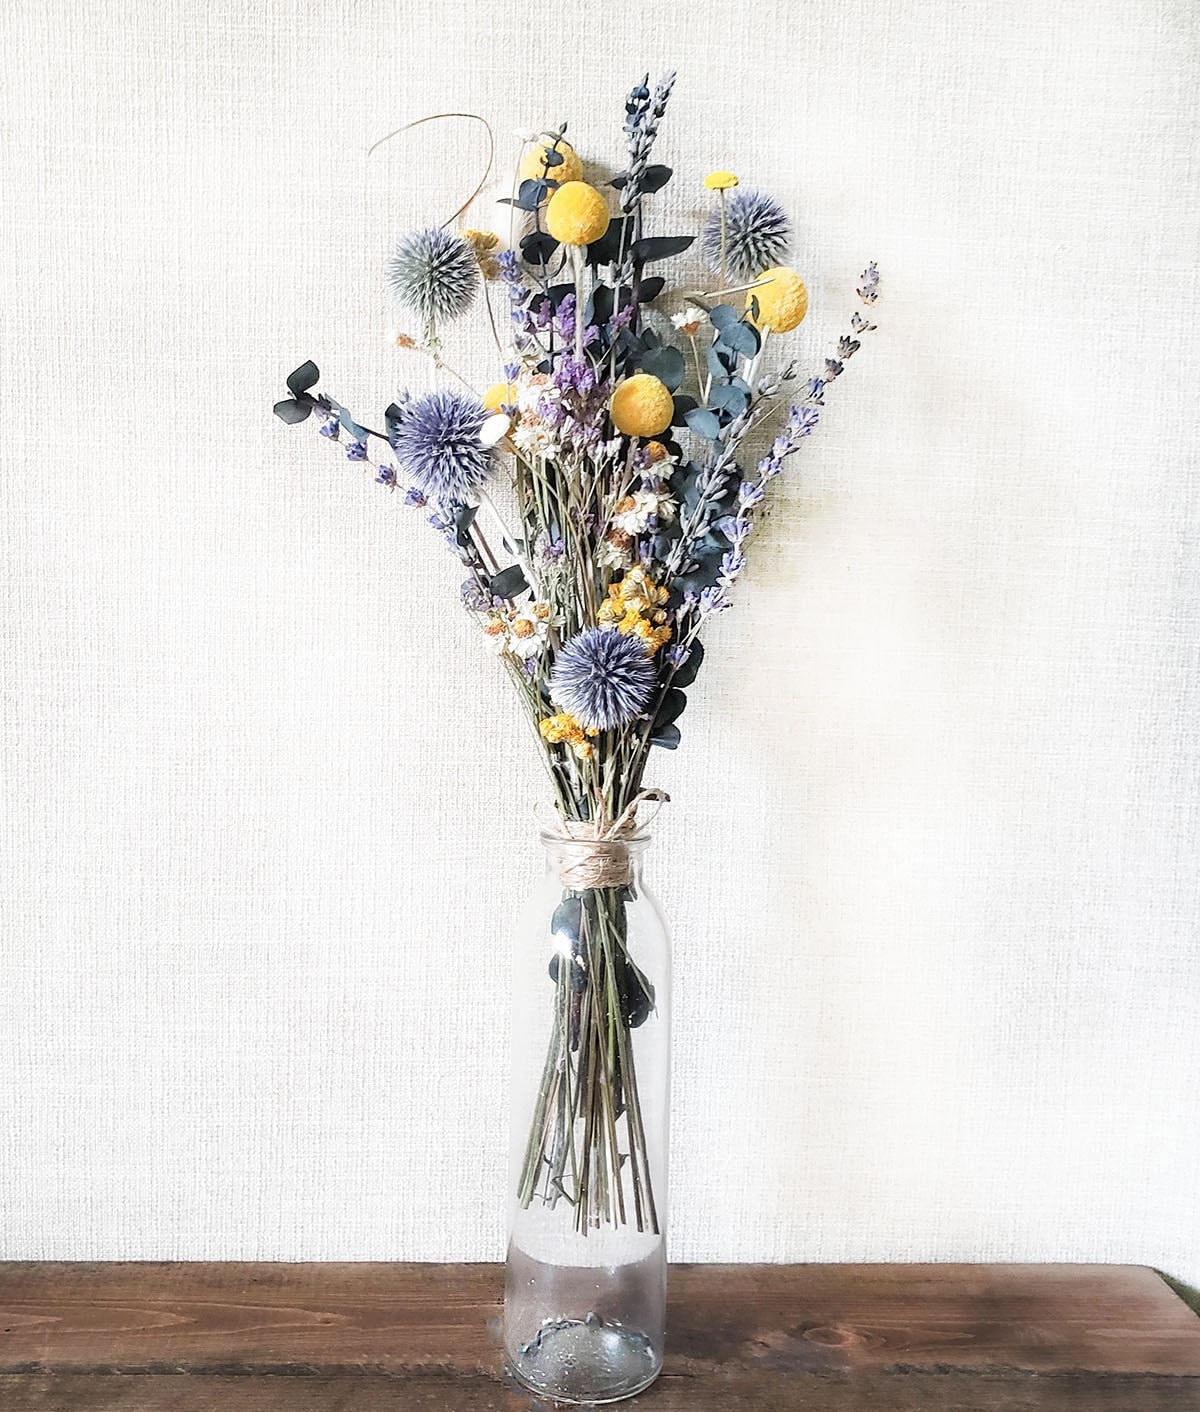 XHXSTORE 36 Balls Natural Dried Flowers Bouquet Craspedia Billy Button  Flowers Stems Christmas Dried Plants Dried White Flower for Dried Floral  Xmas